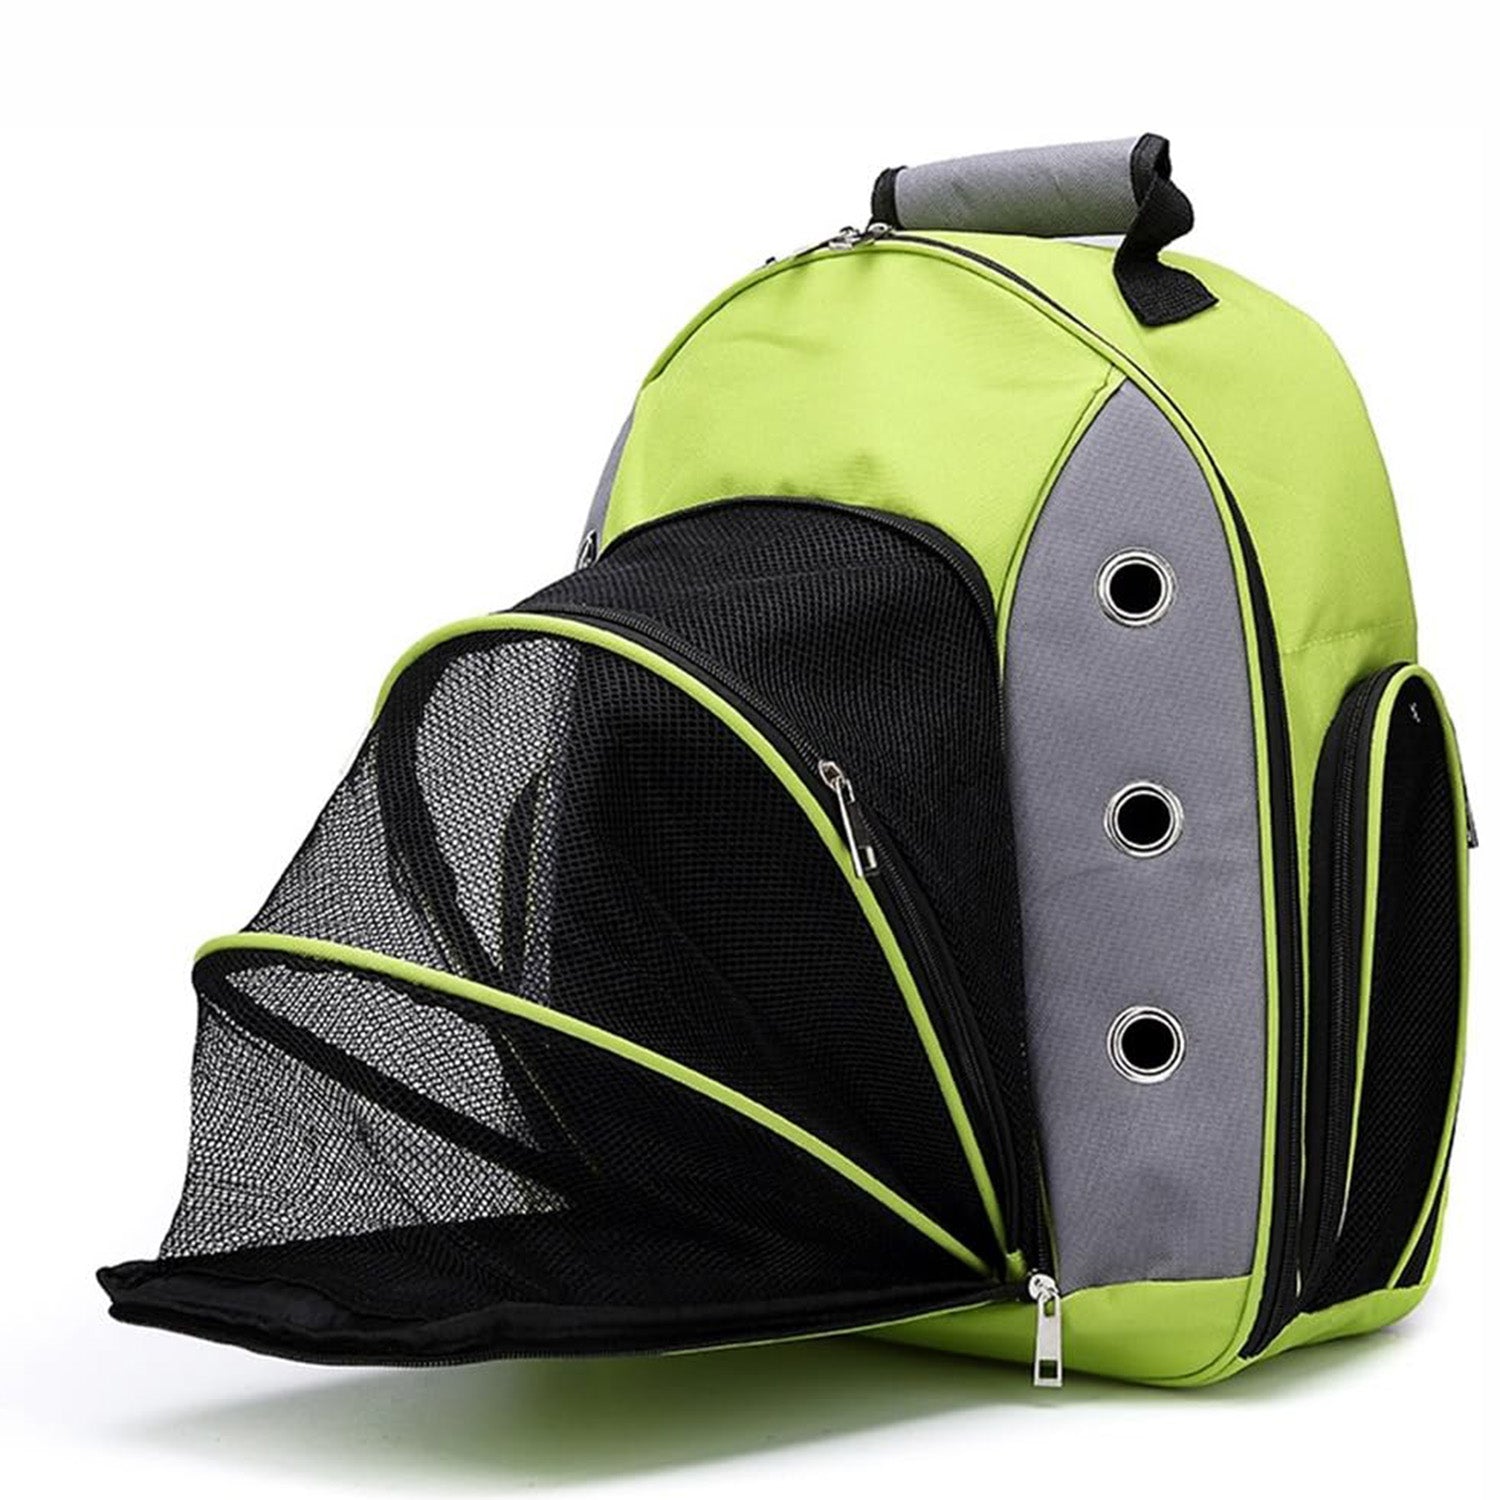 LUCKYERMORE Pet Carrier Backpack With Mesh Widow Dog Cat Small Animals Travel Bag, Green